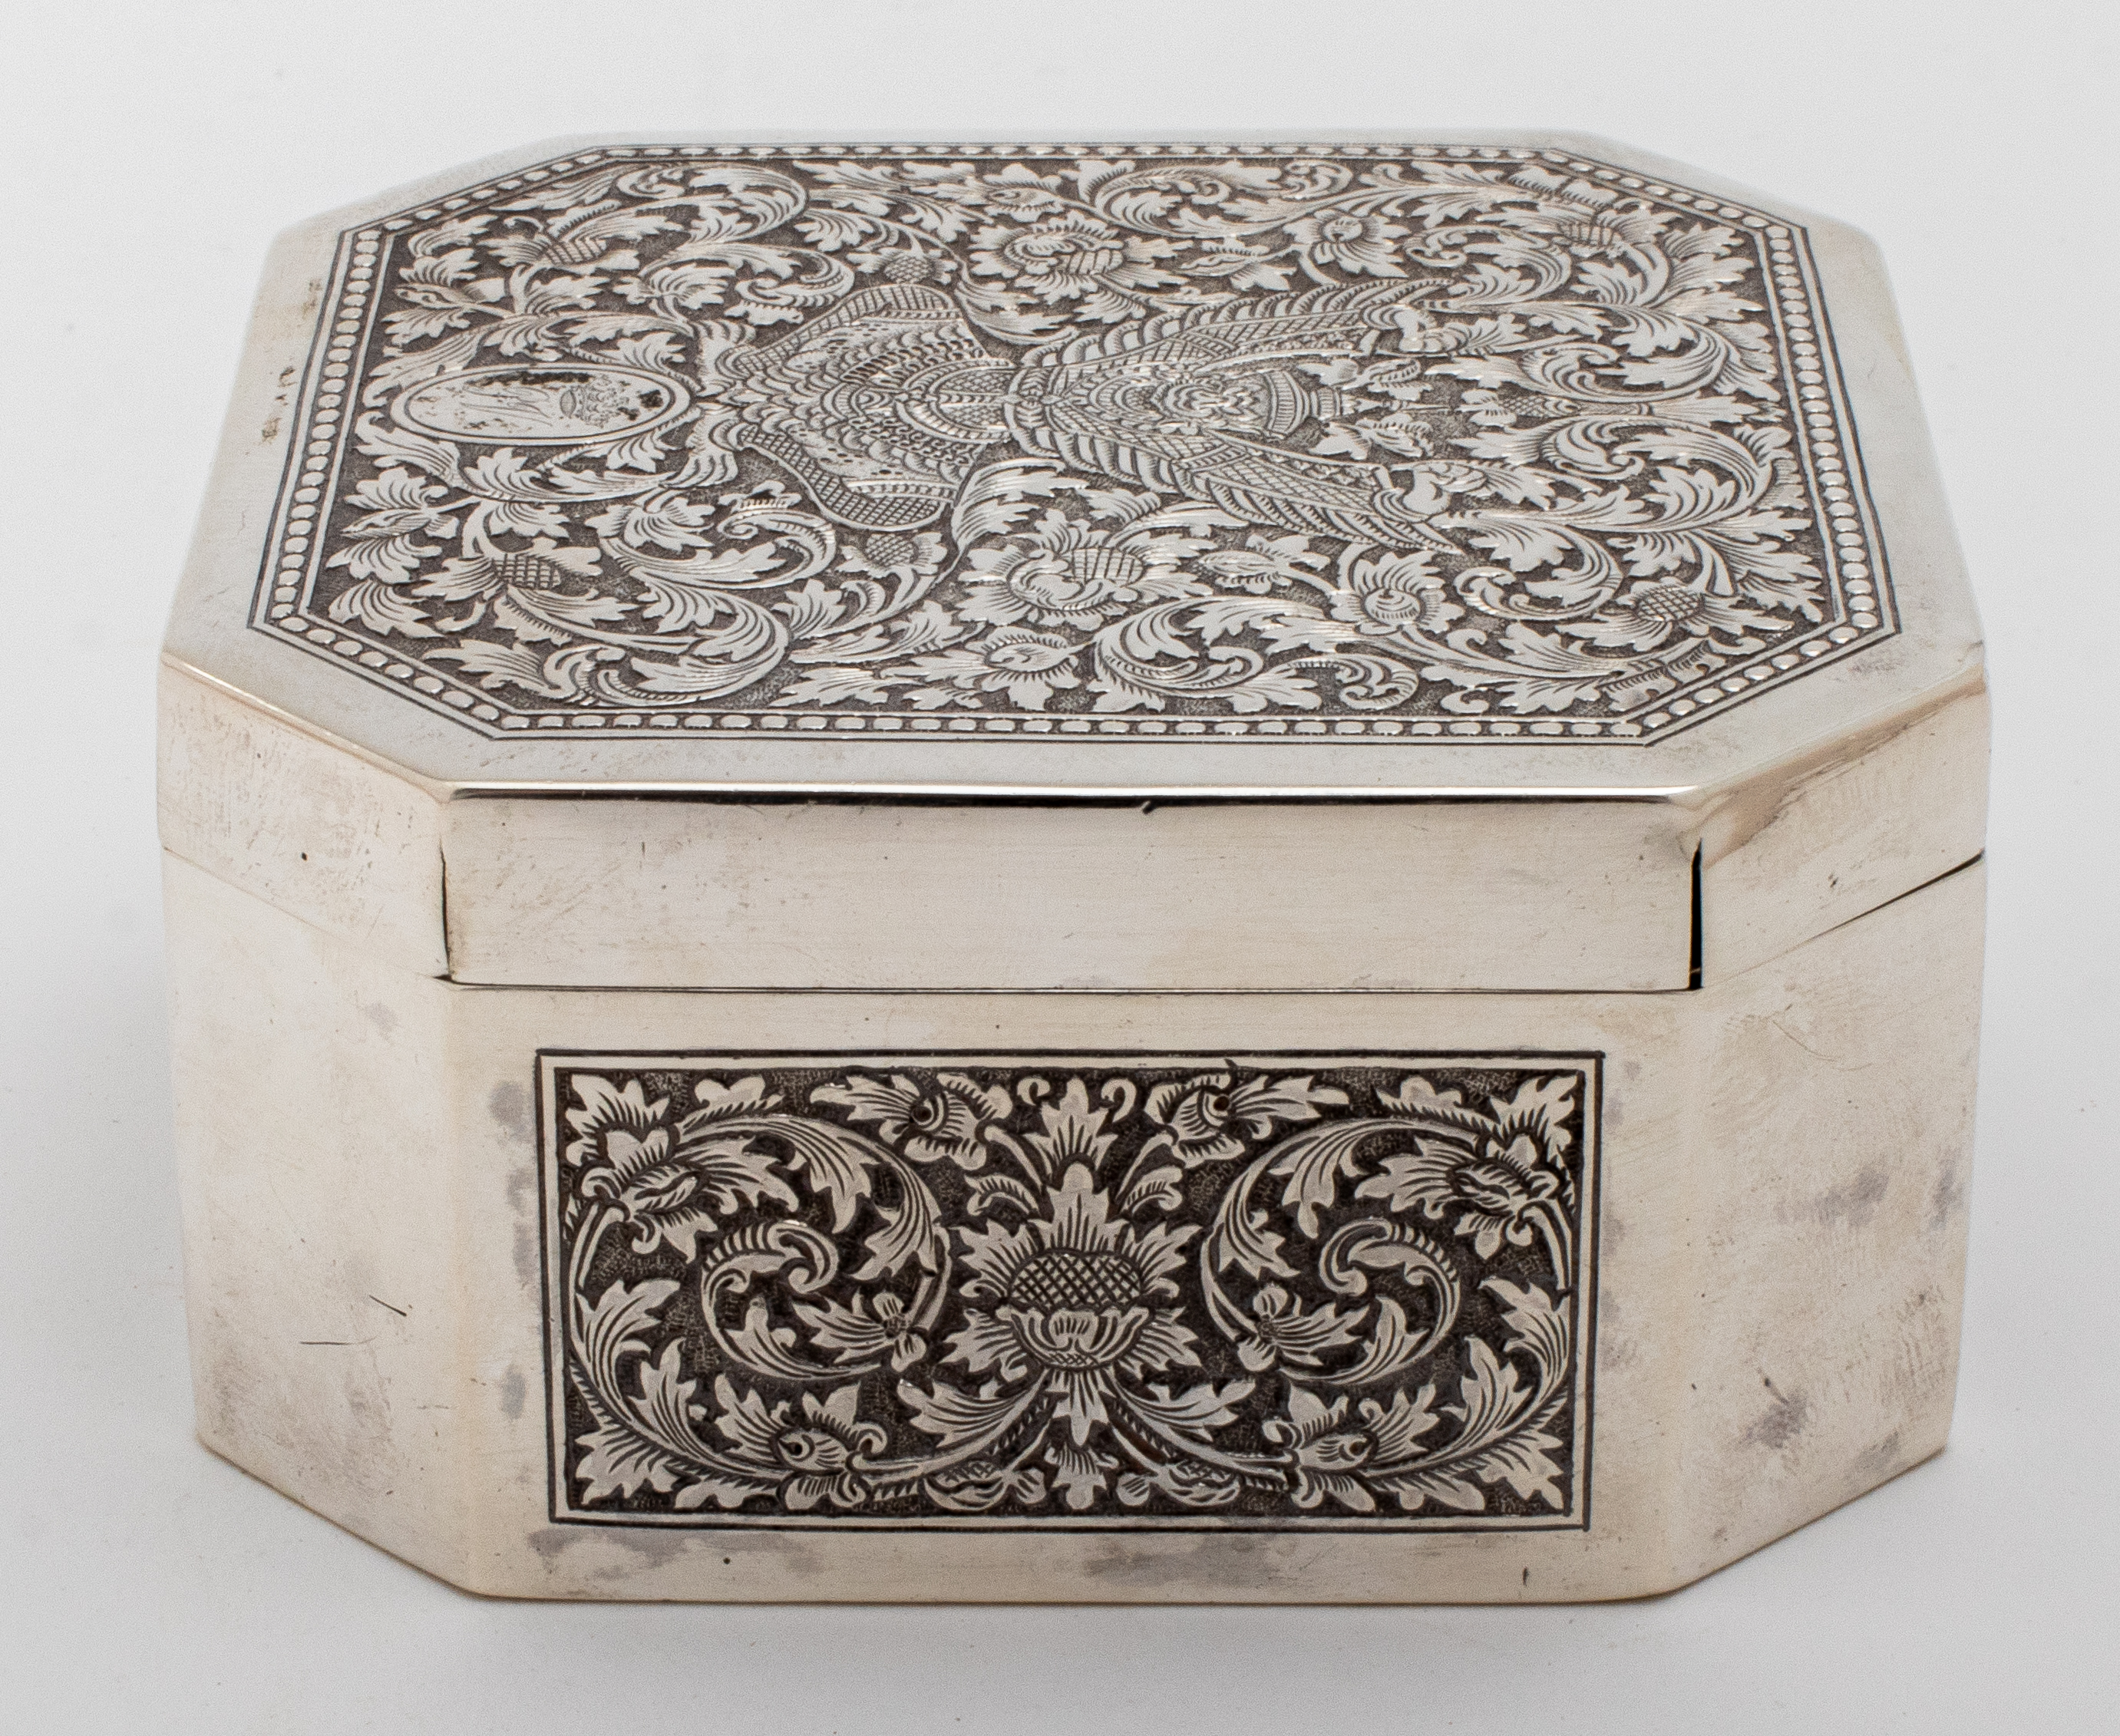 SIAMESE SILVER ENGRAVED BOX 19TH 2be1f0